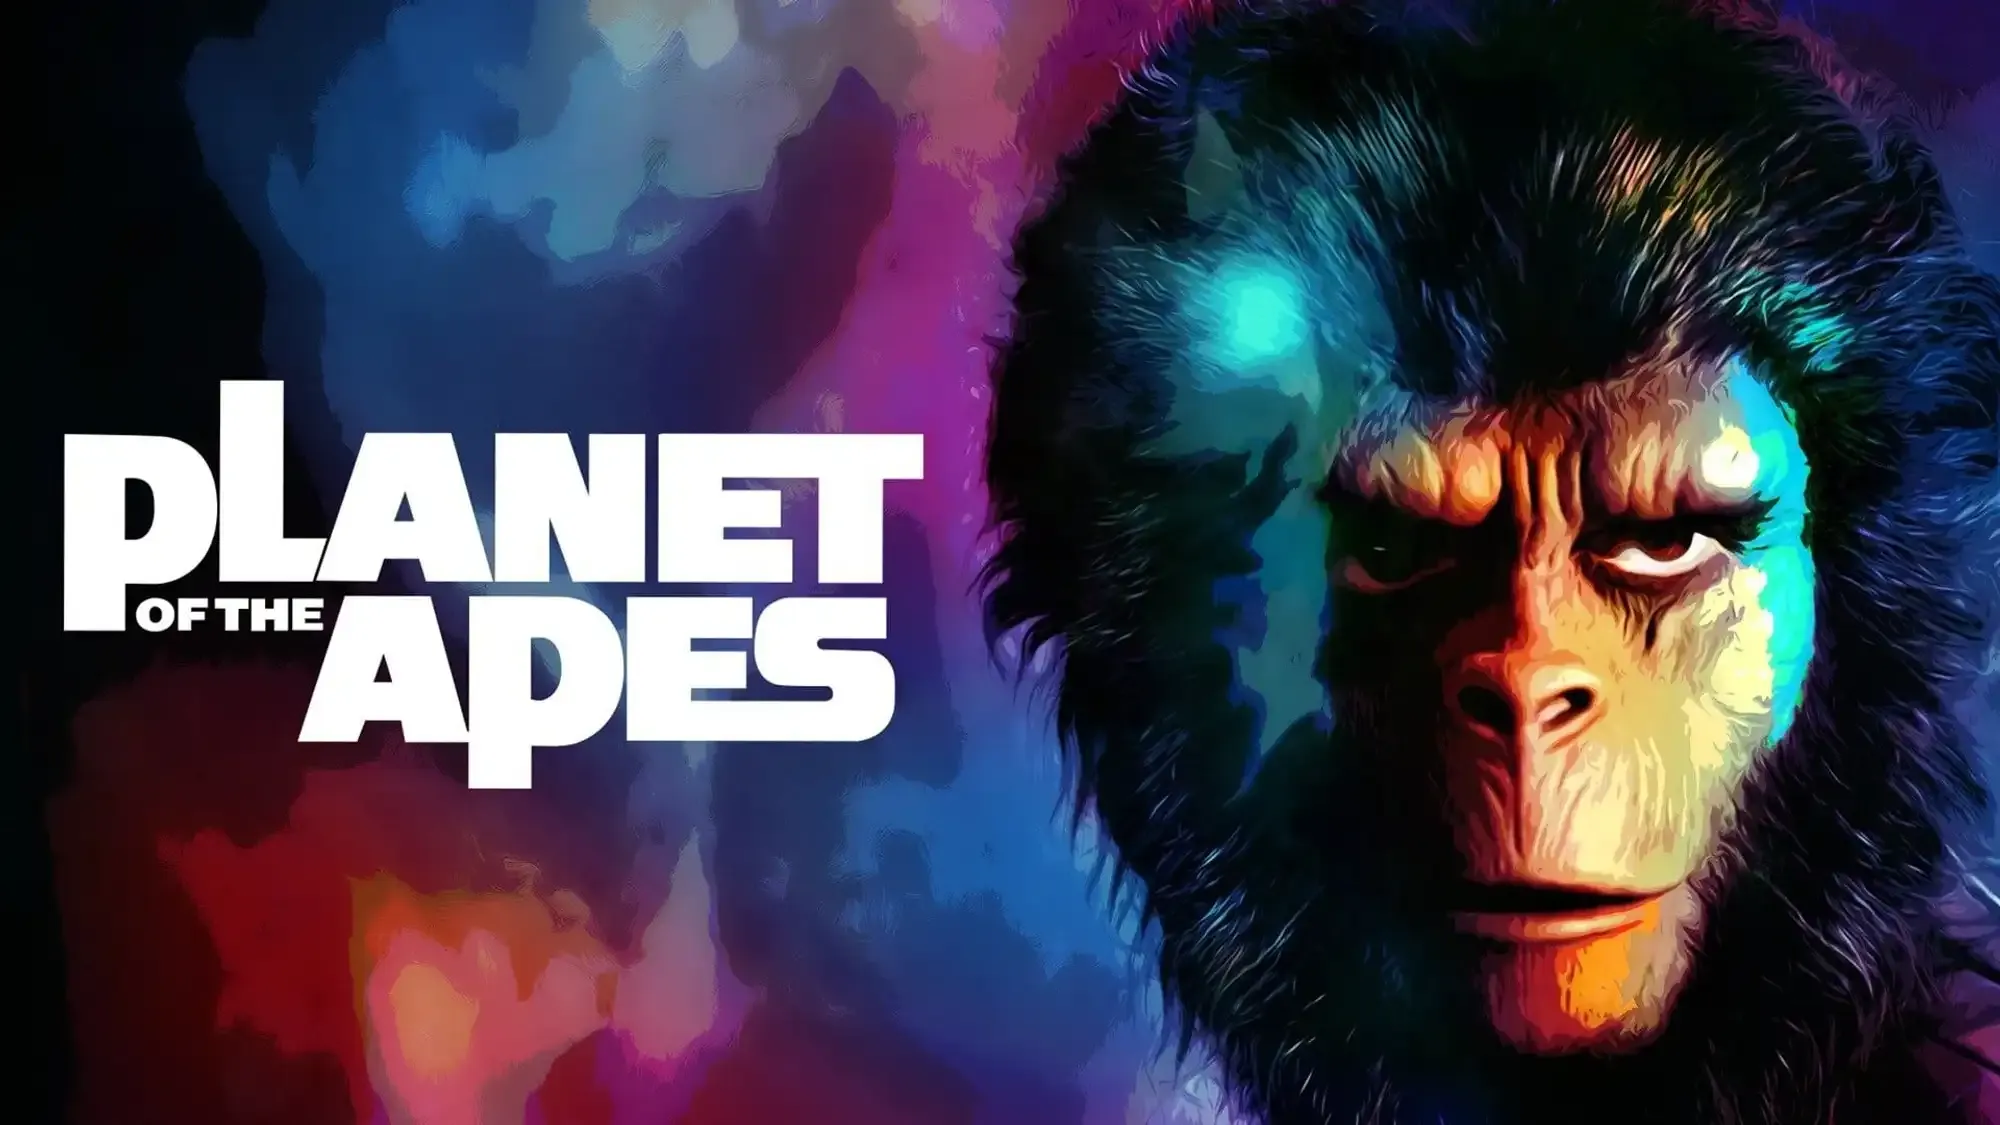 Planet of the Apes movie review